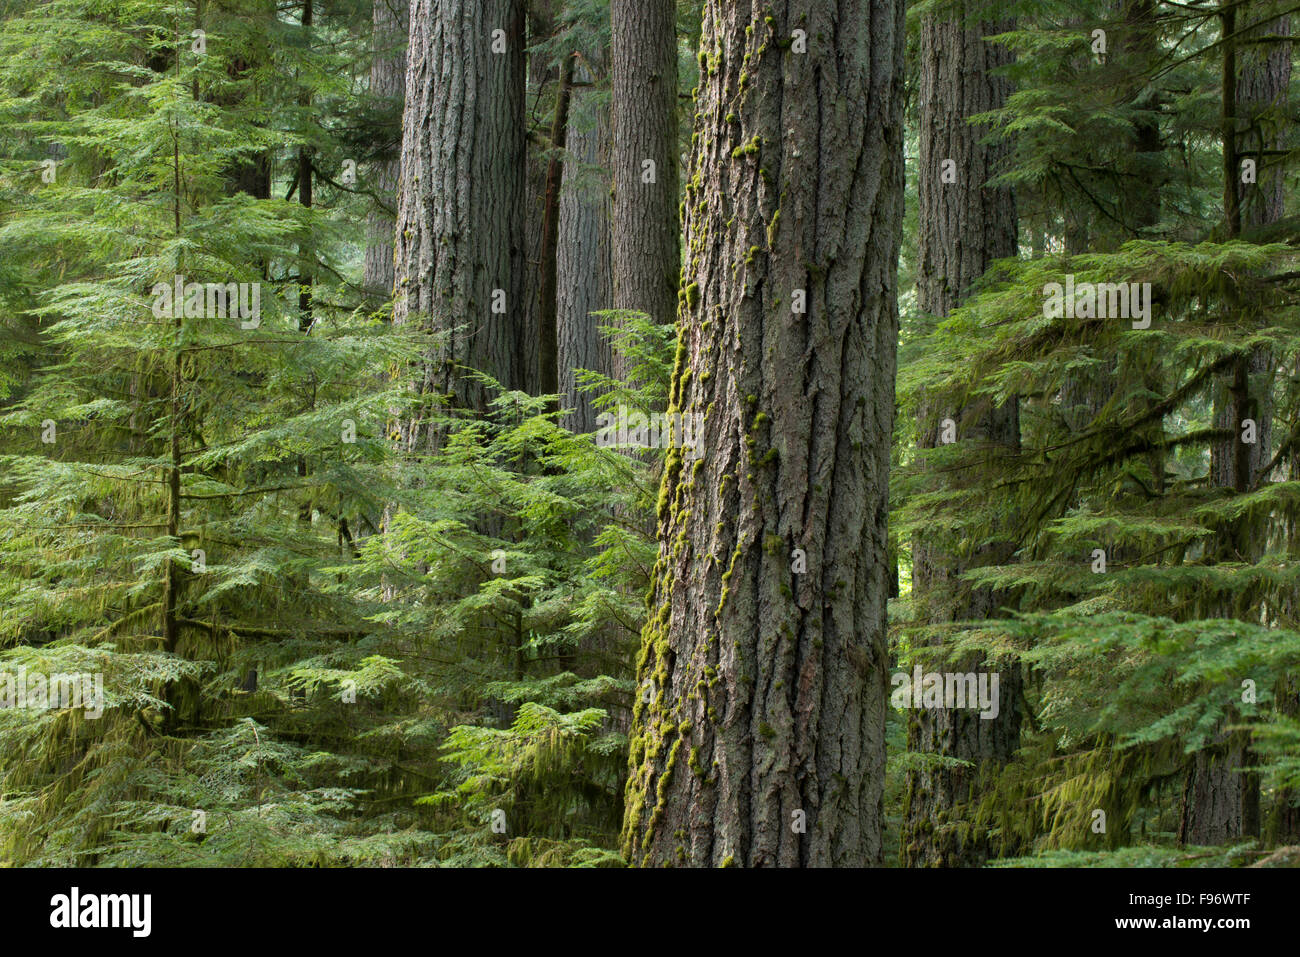 Douglas Fir tree in forest stand at CathedralGrove, MacMillan Provicial Park, Vancouver island, British Columbia, Canada Stock Photo